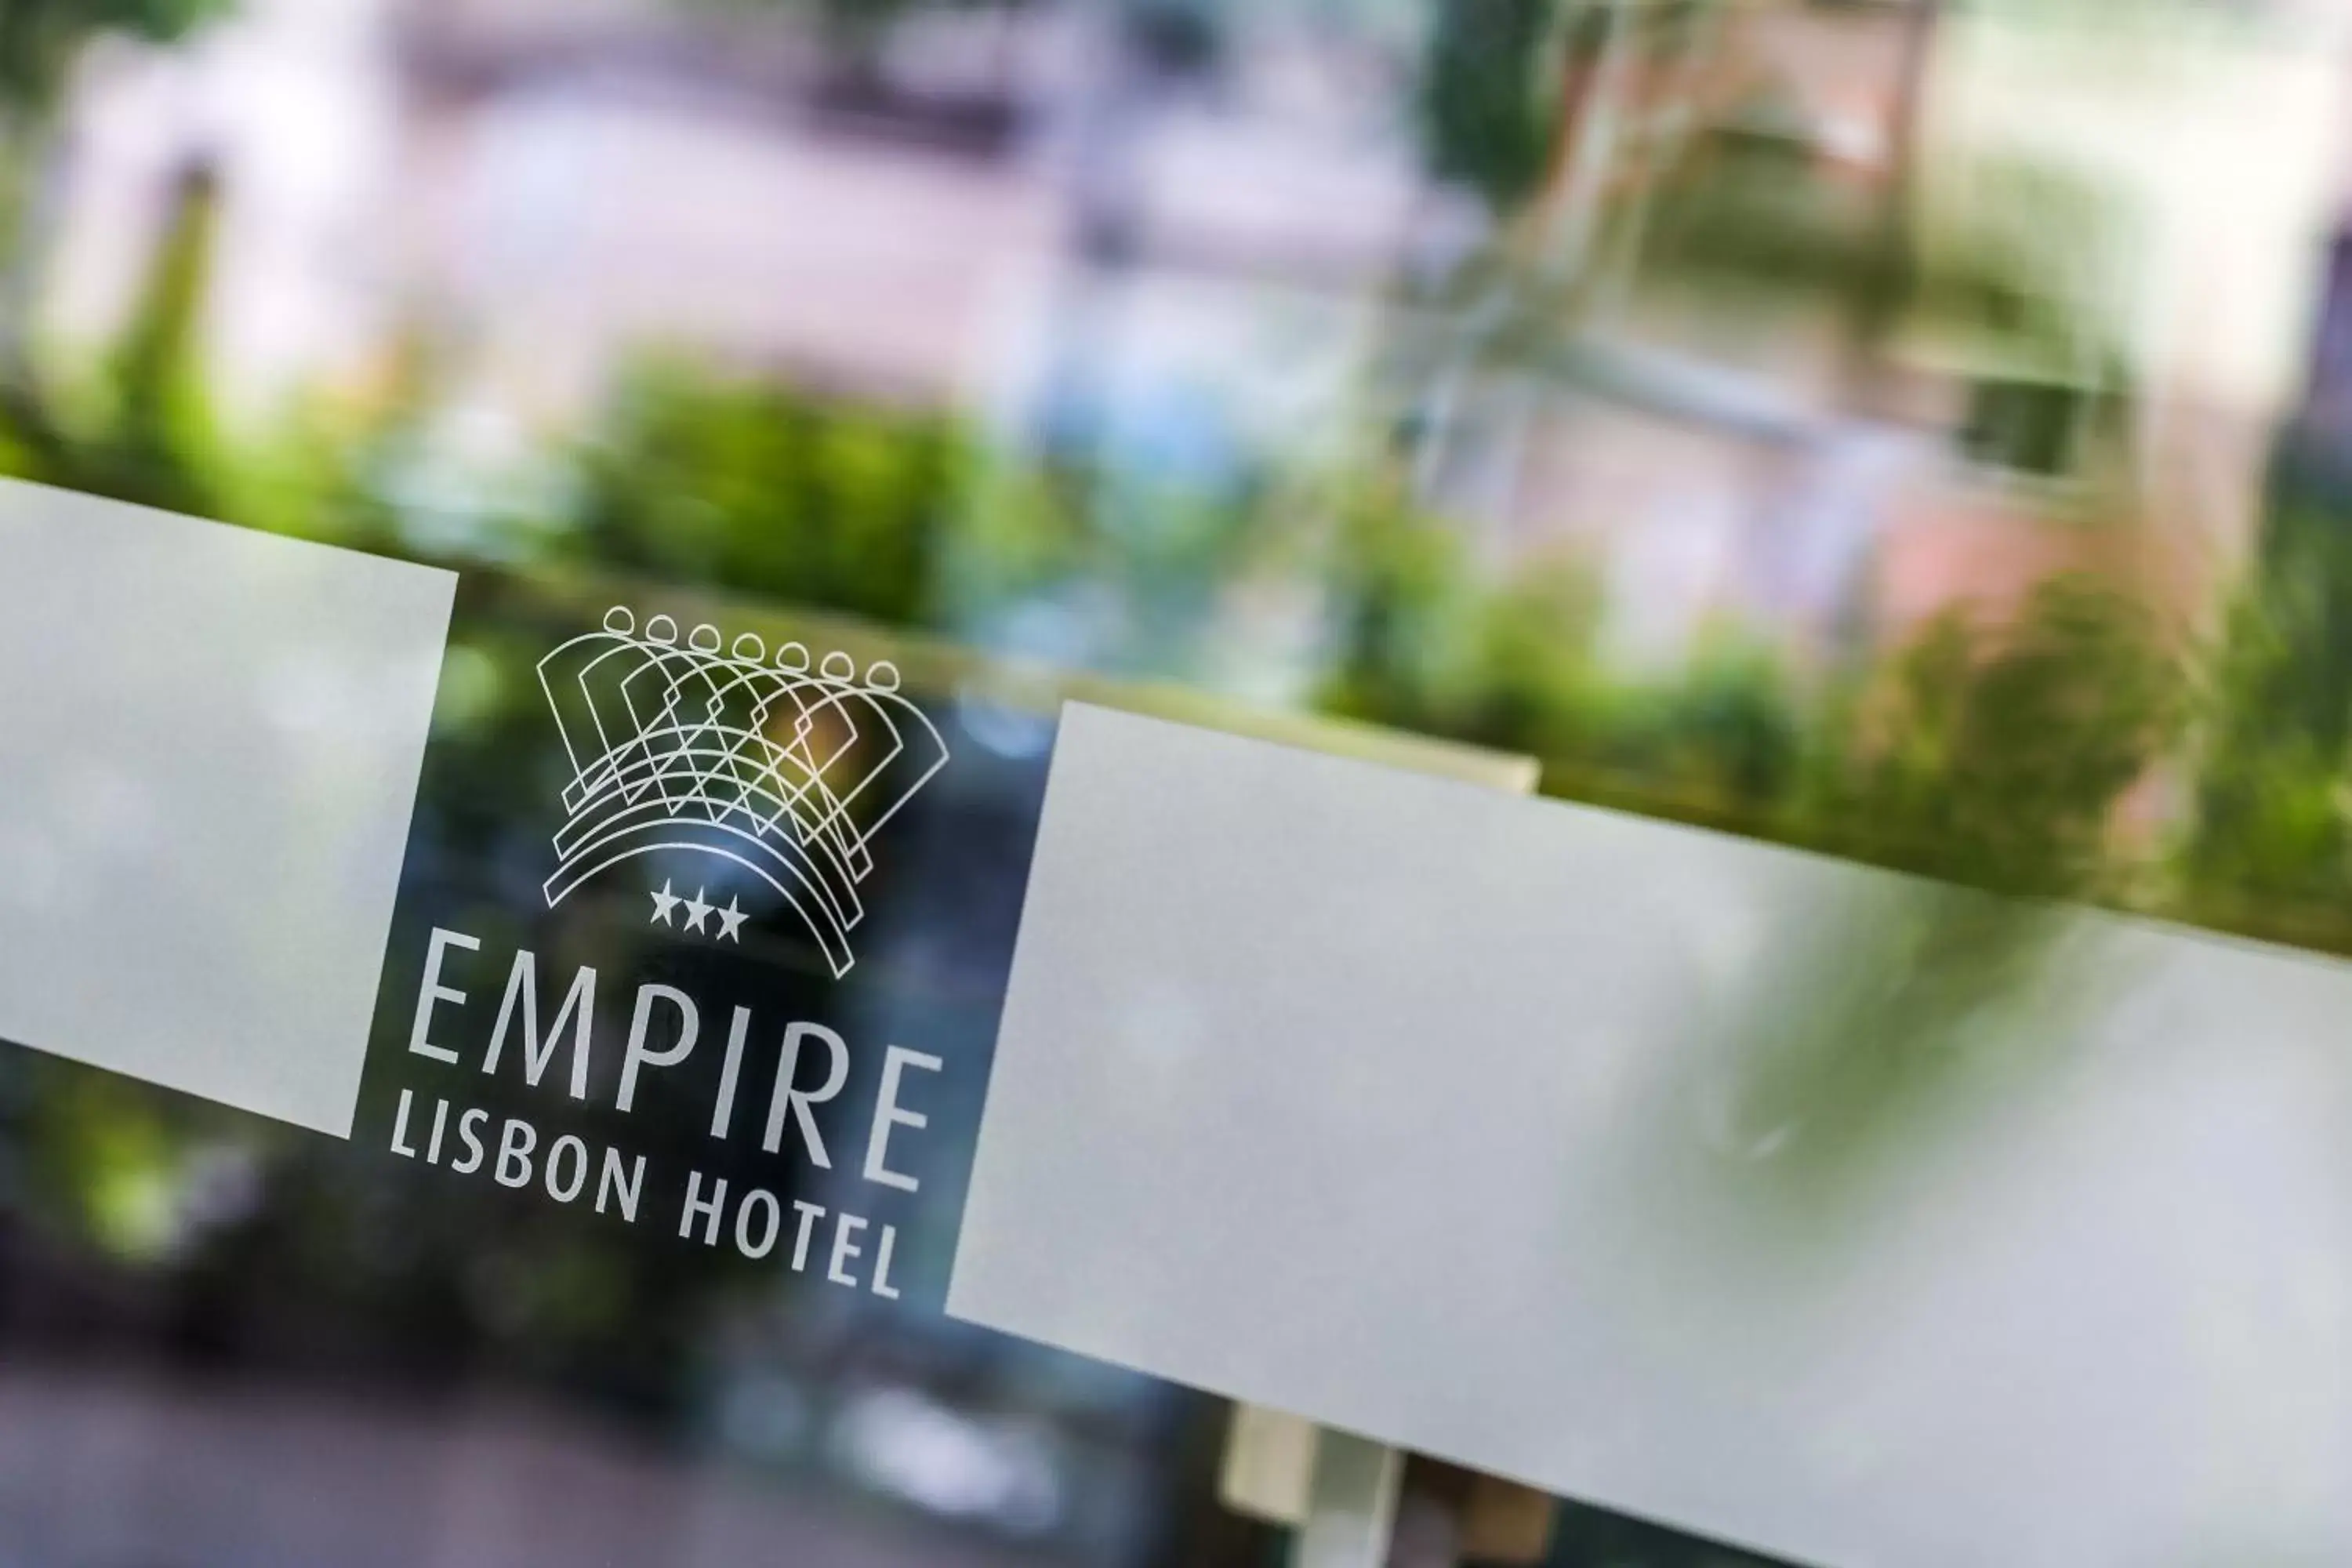 Property logo or sign in Empire Lisbon Hotel